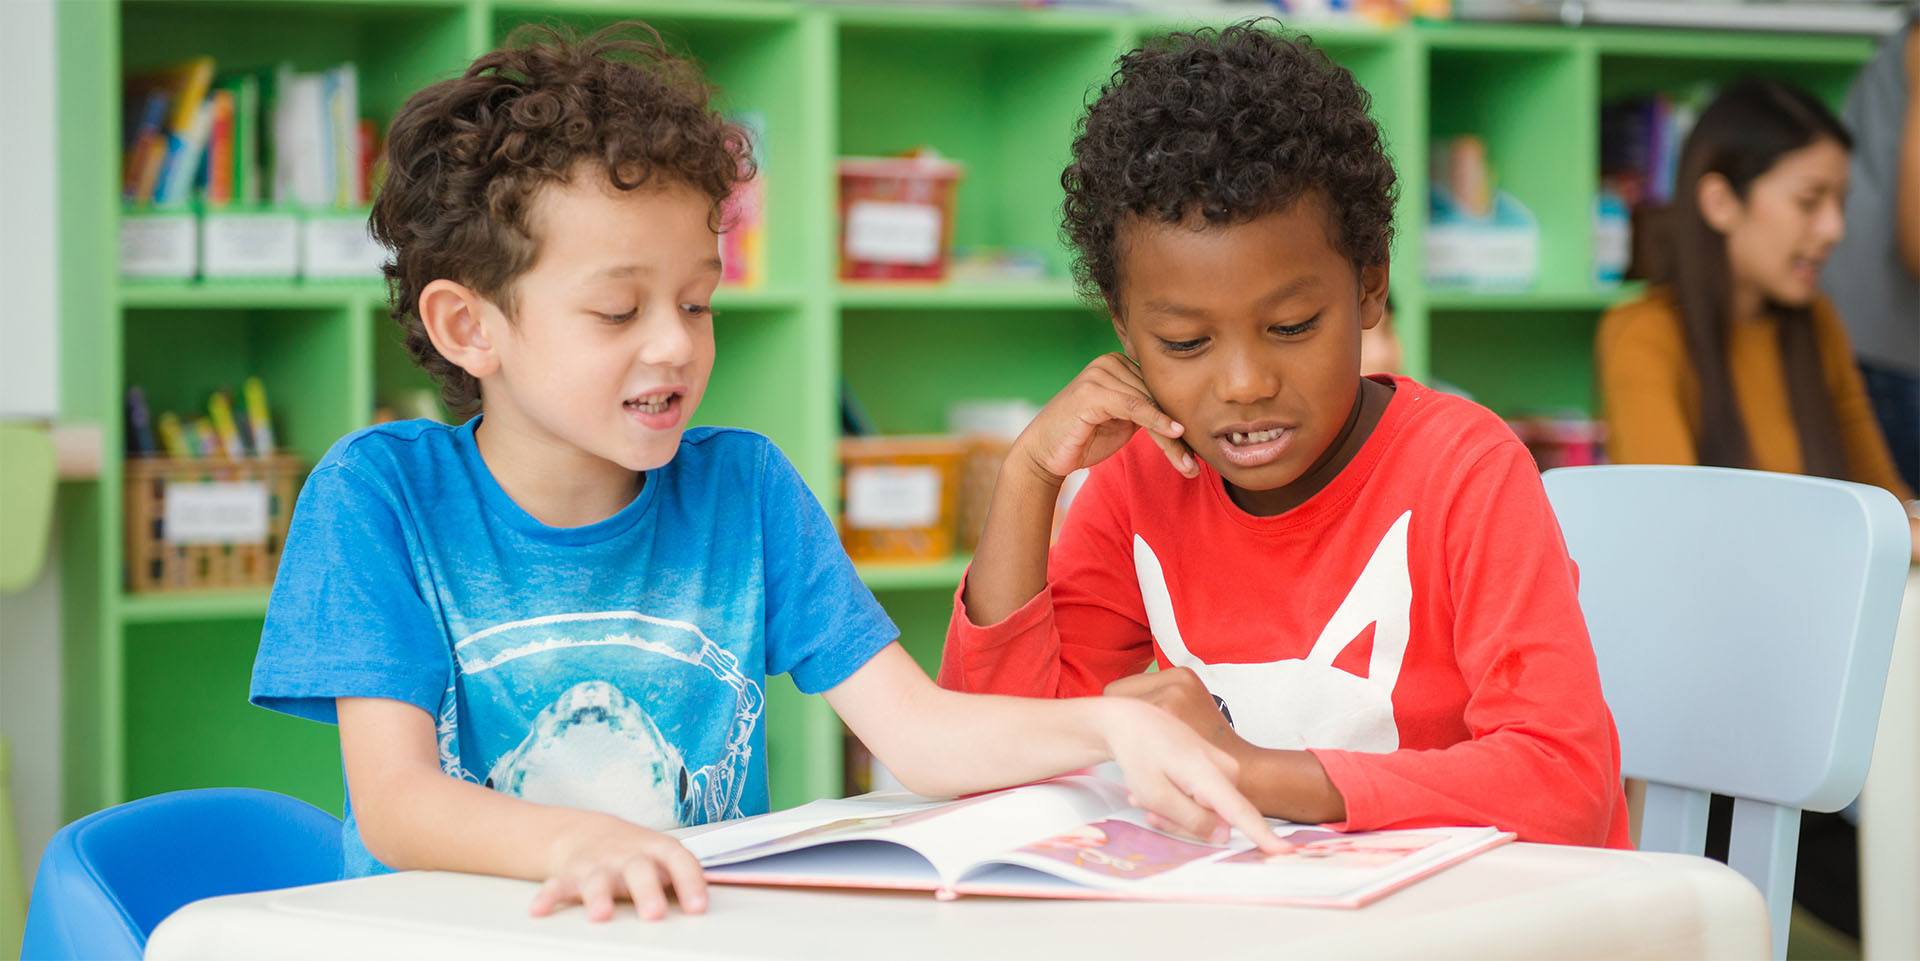 Two boys reading a book together in class